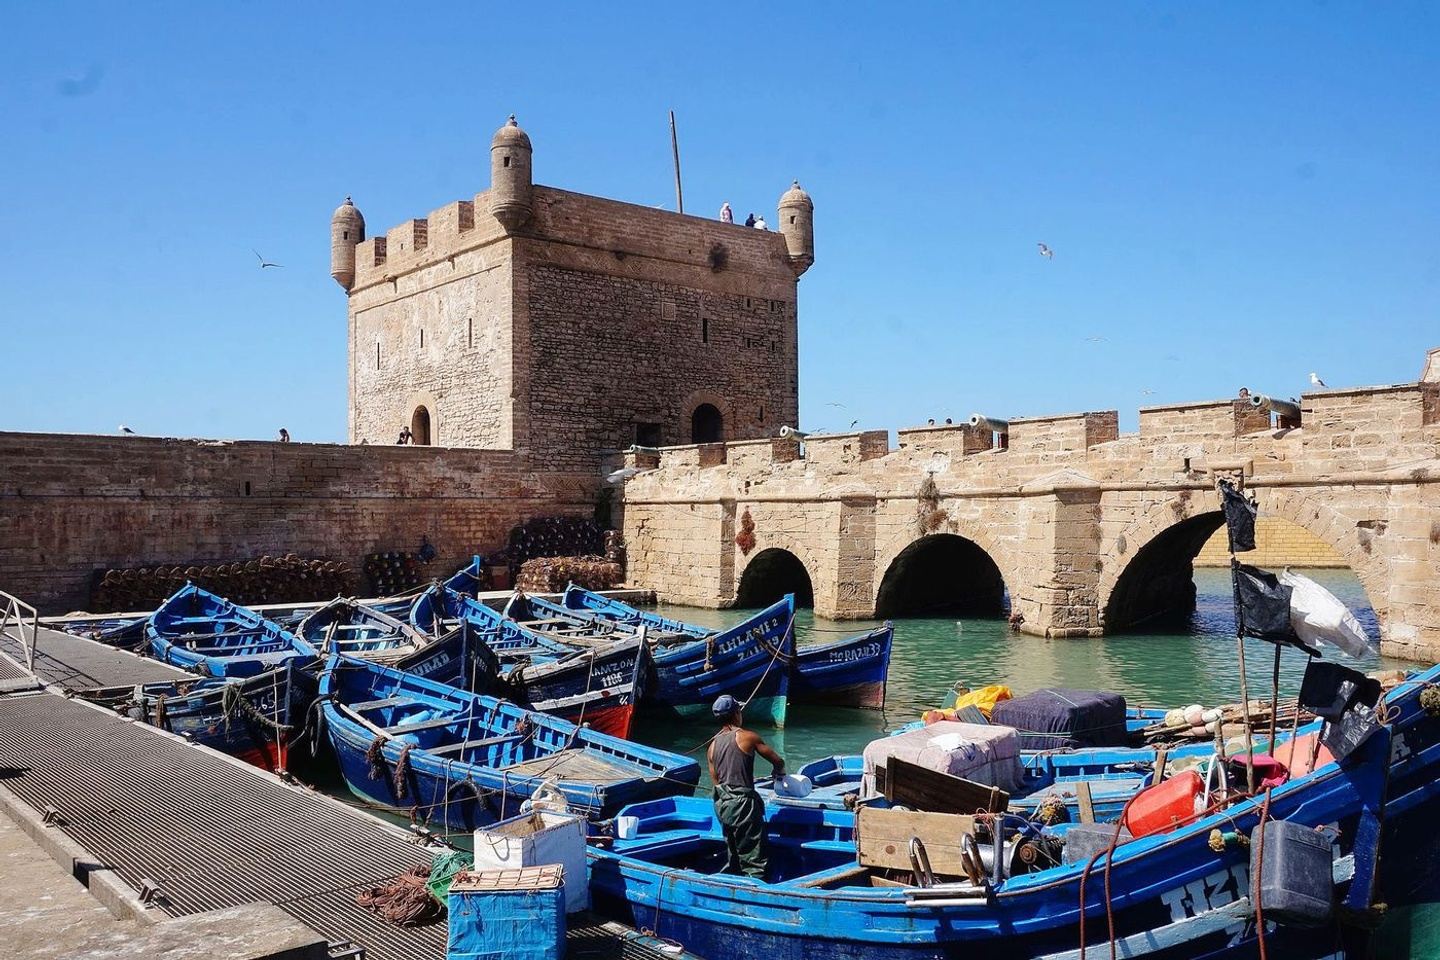 Discover the beautiful city of Essaouira on a day trip